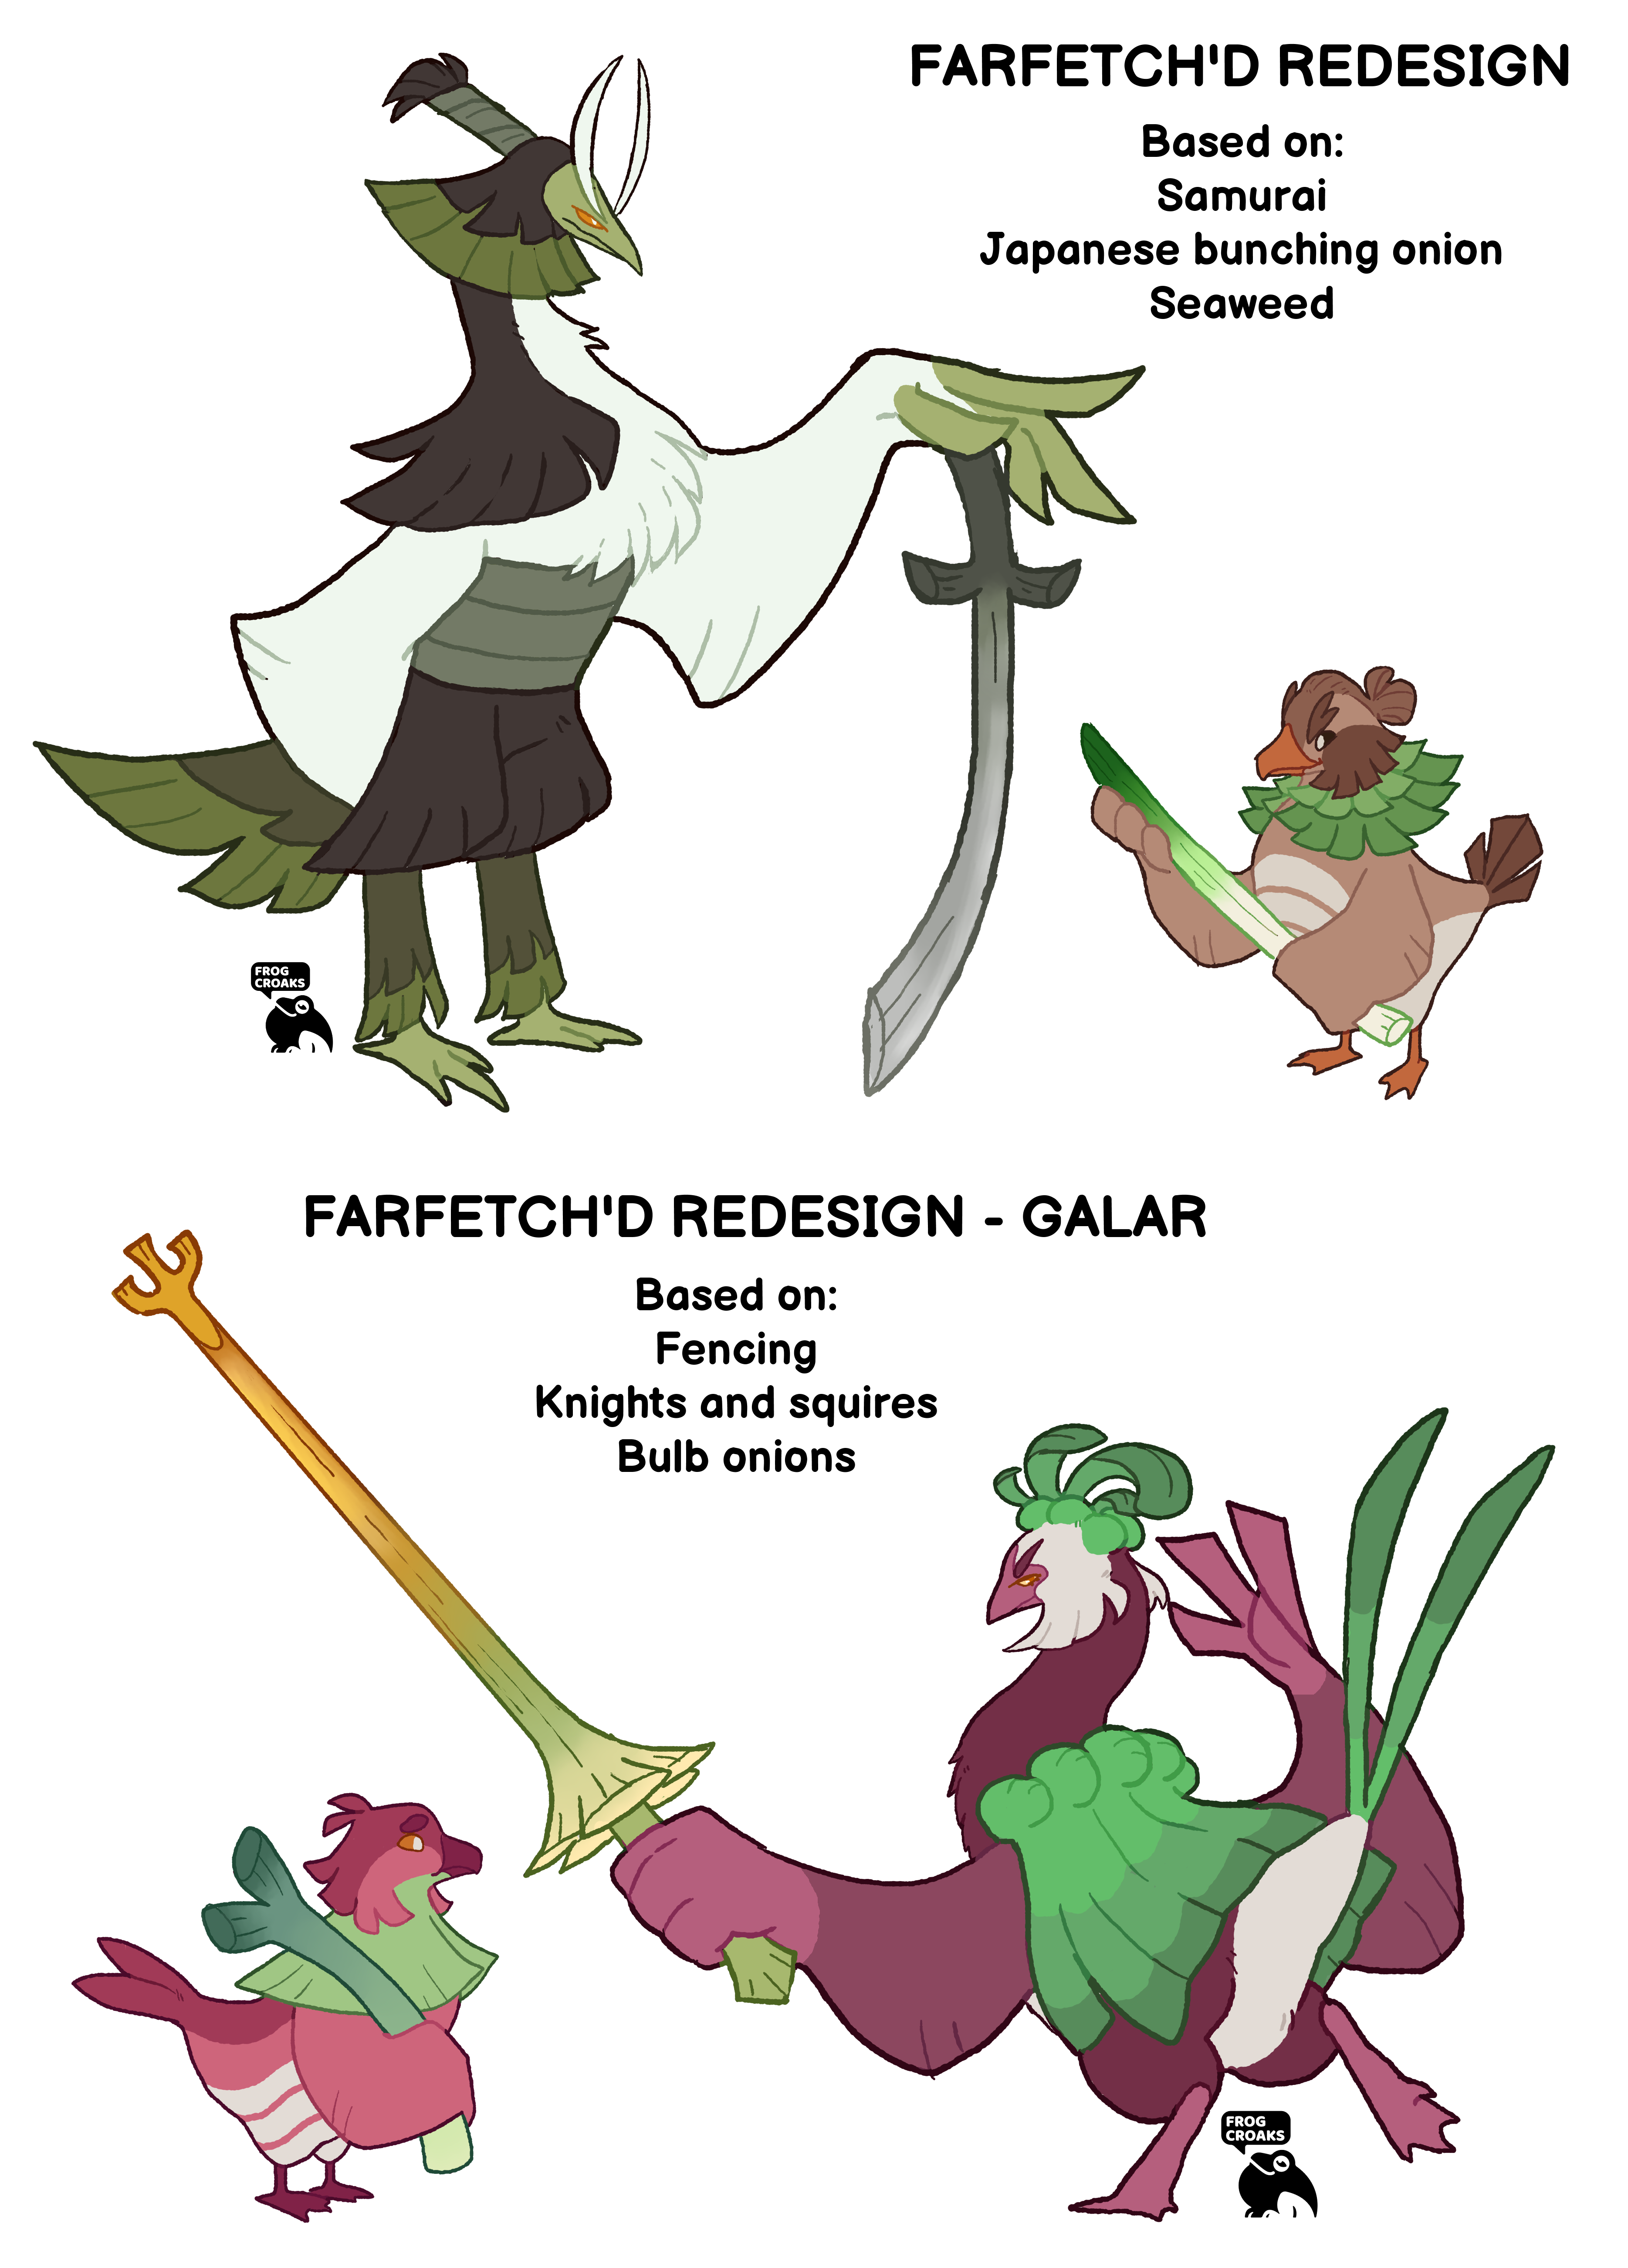 User:The Plausible Farfetch'd - Bulbapedia, the community-driven